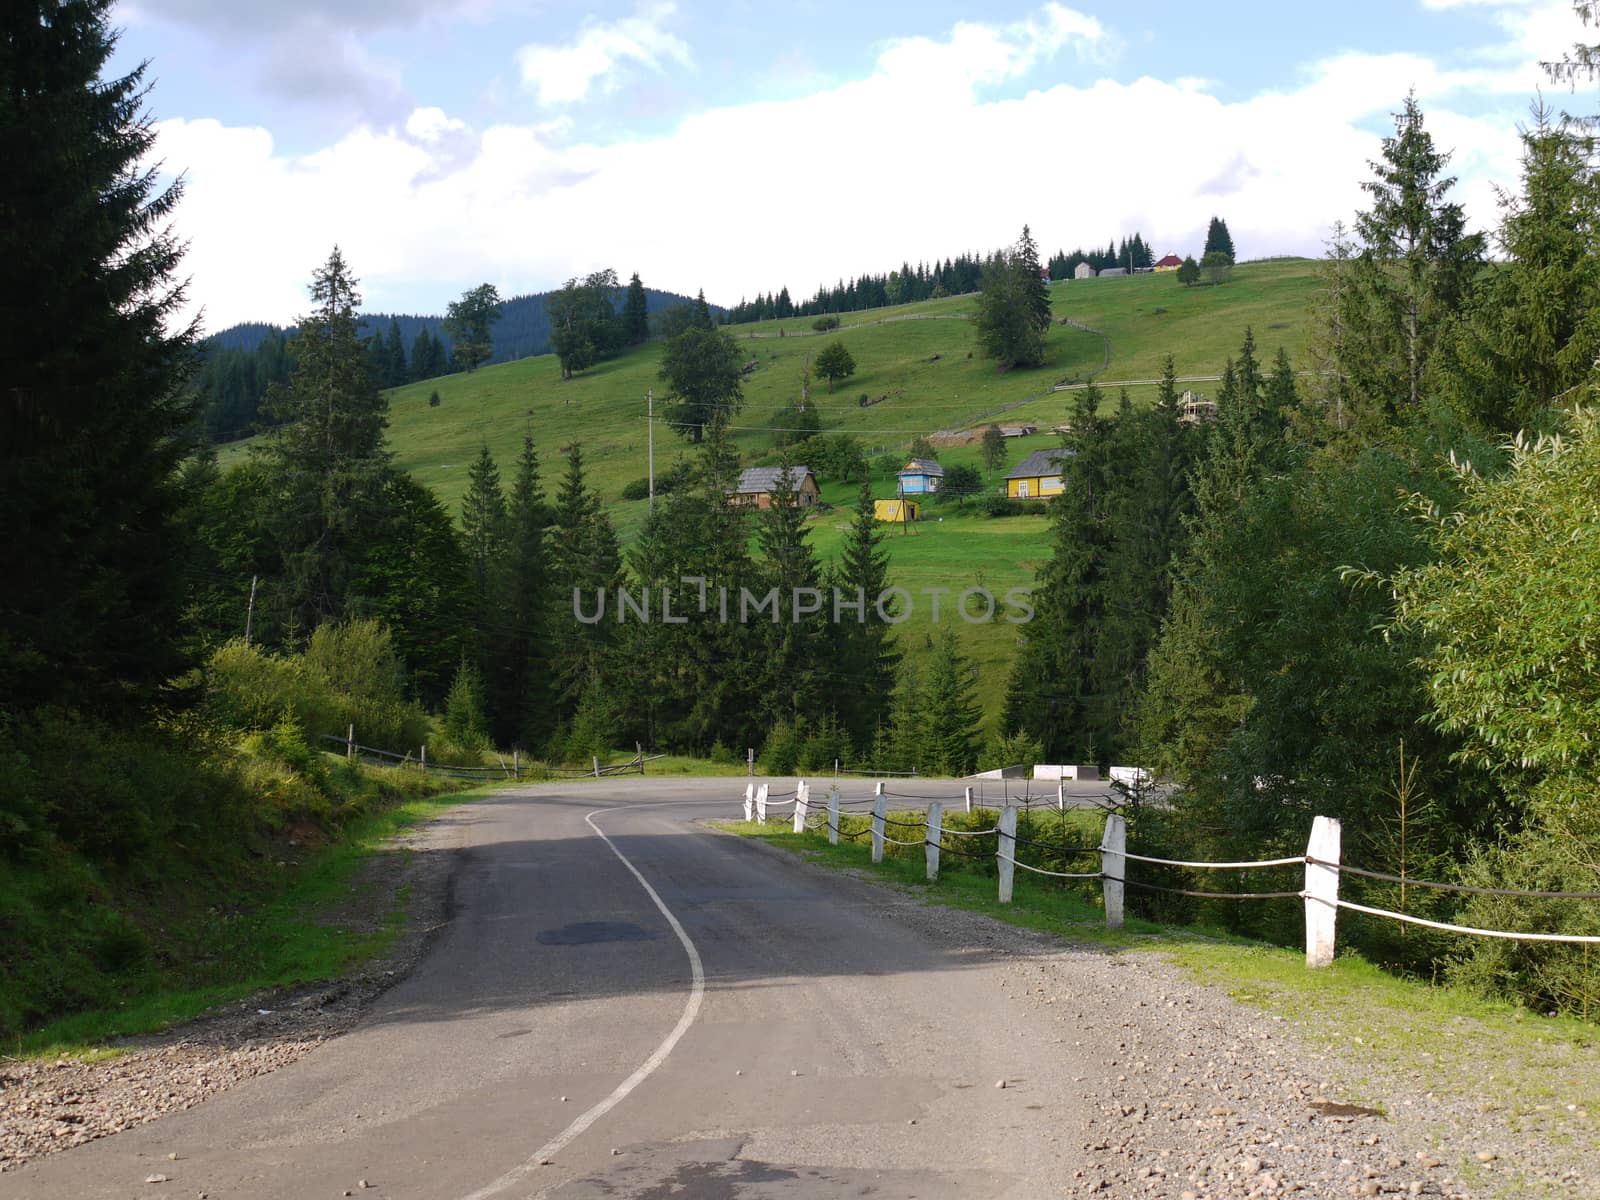 The route leading to the village consists of several dozen houses by Adamchuk